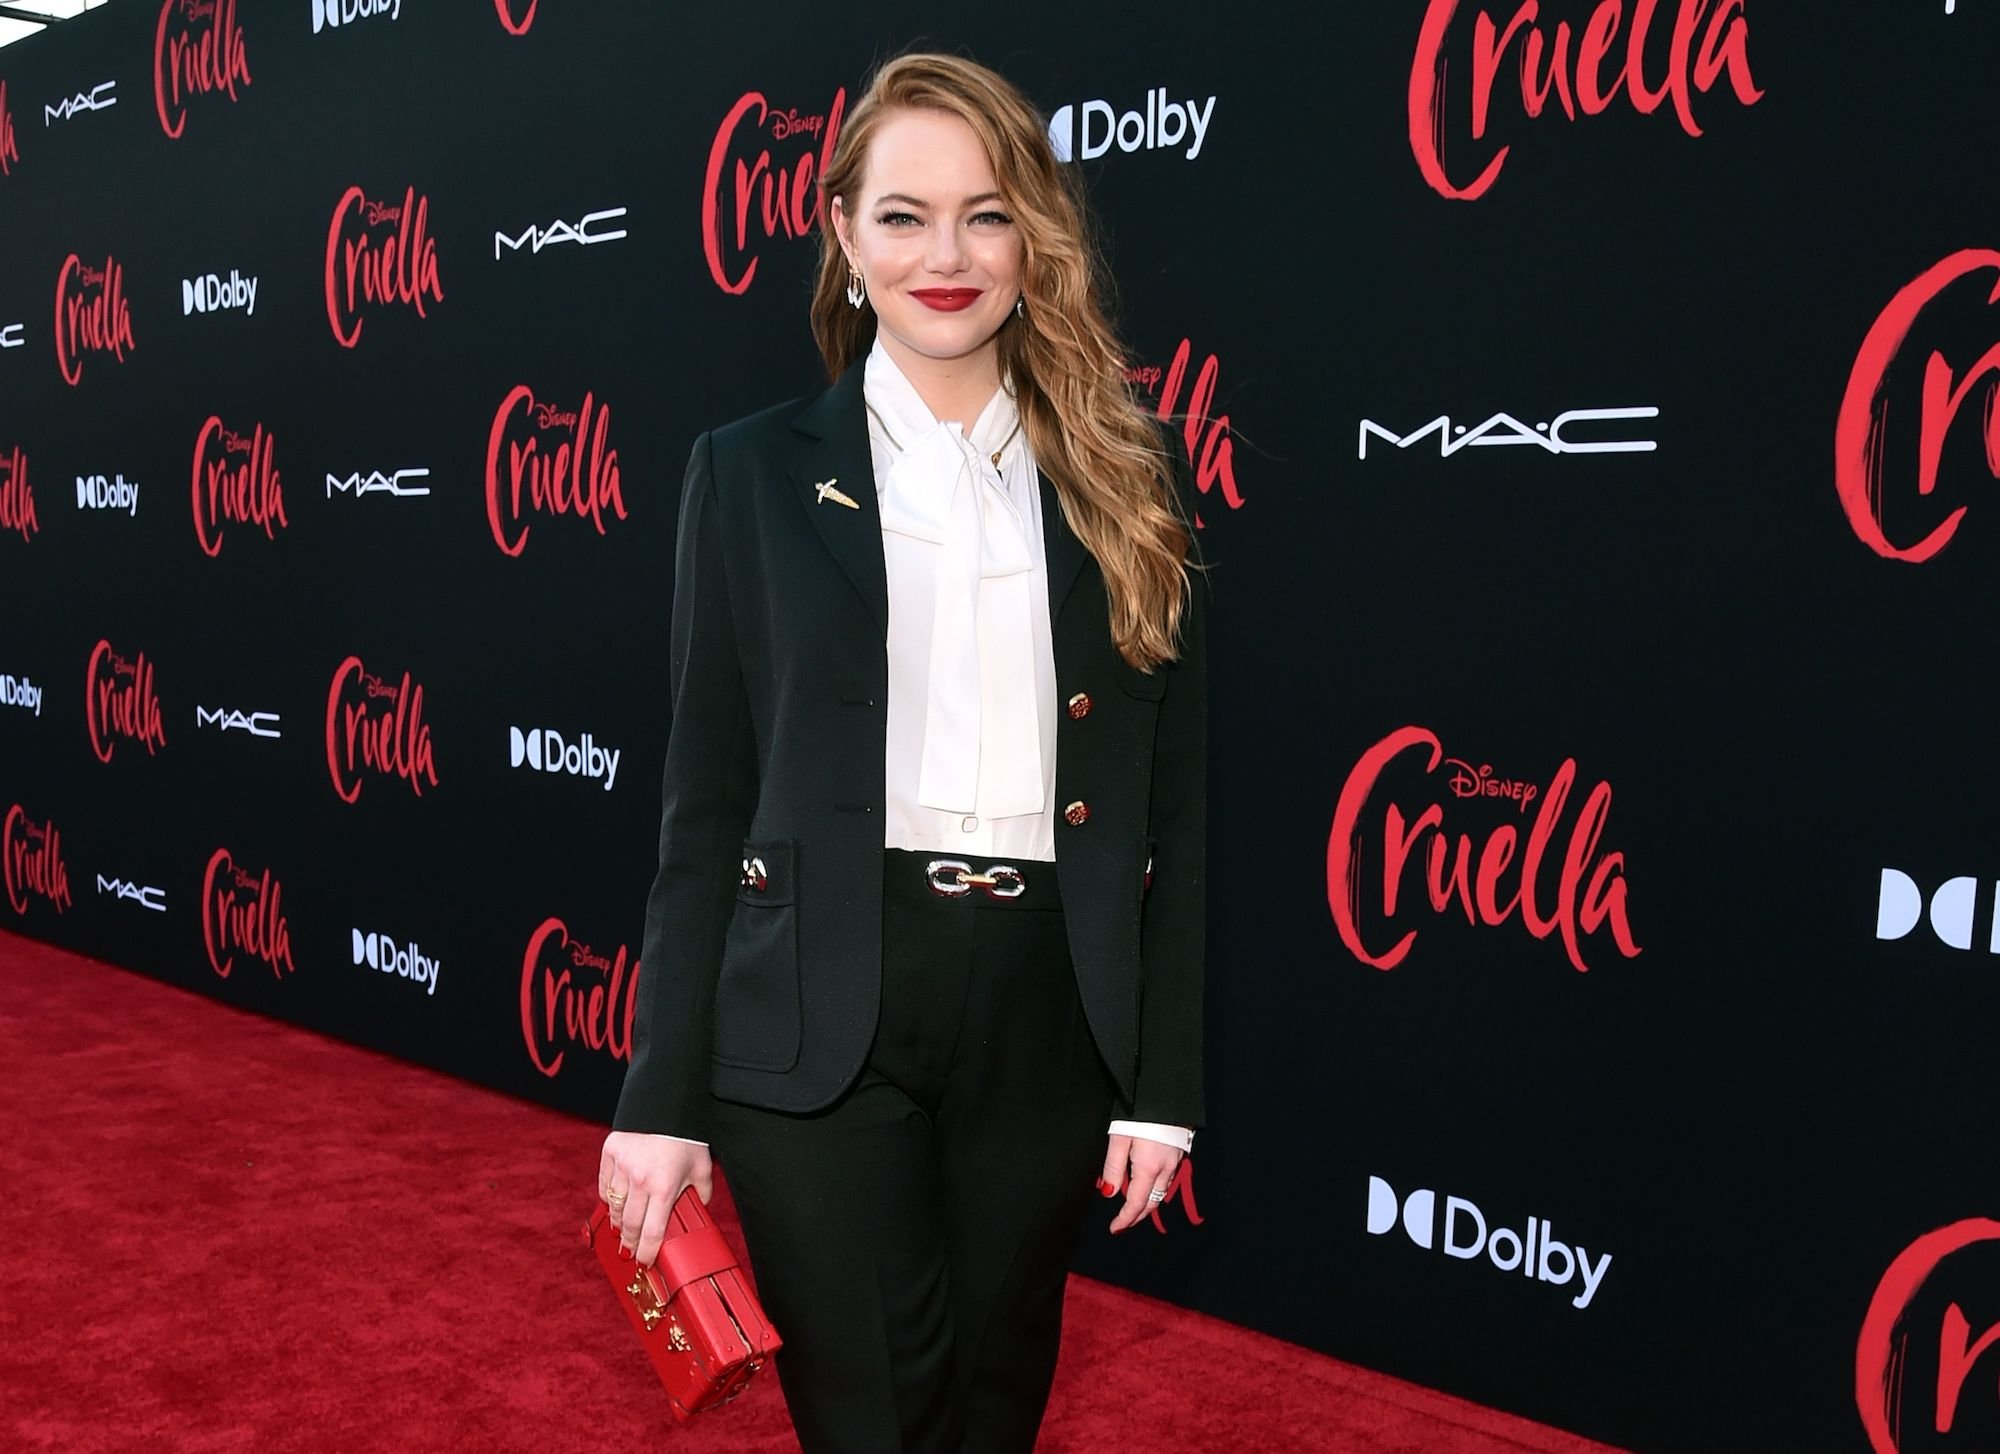 Emma Stone standing on the red carpet at the premiere for 'Cruella' 